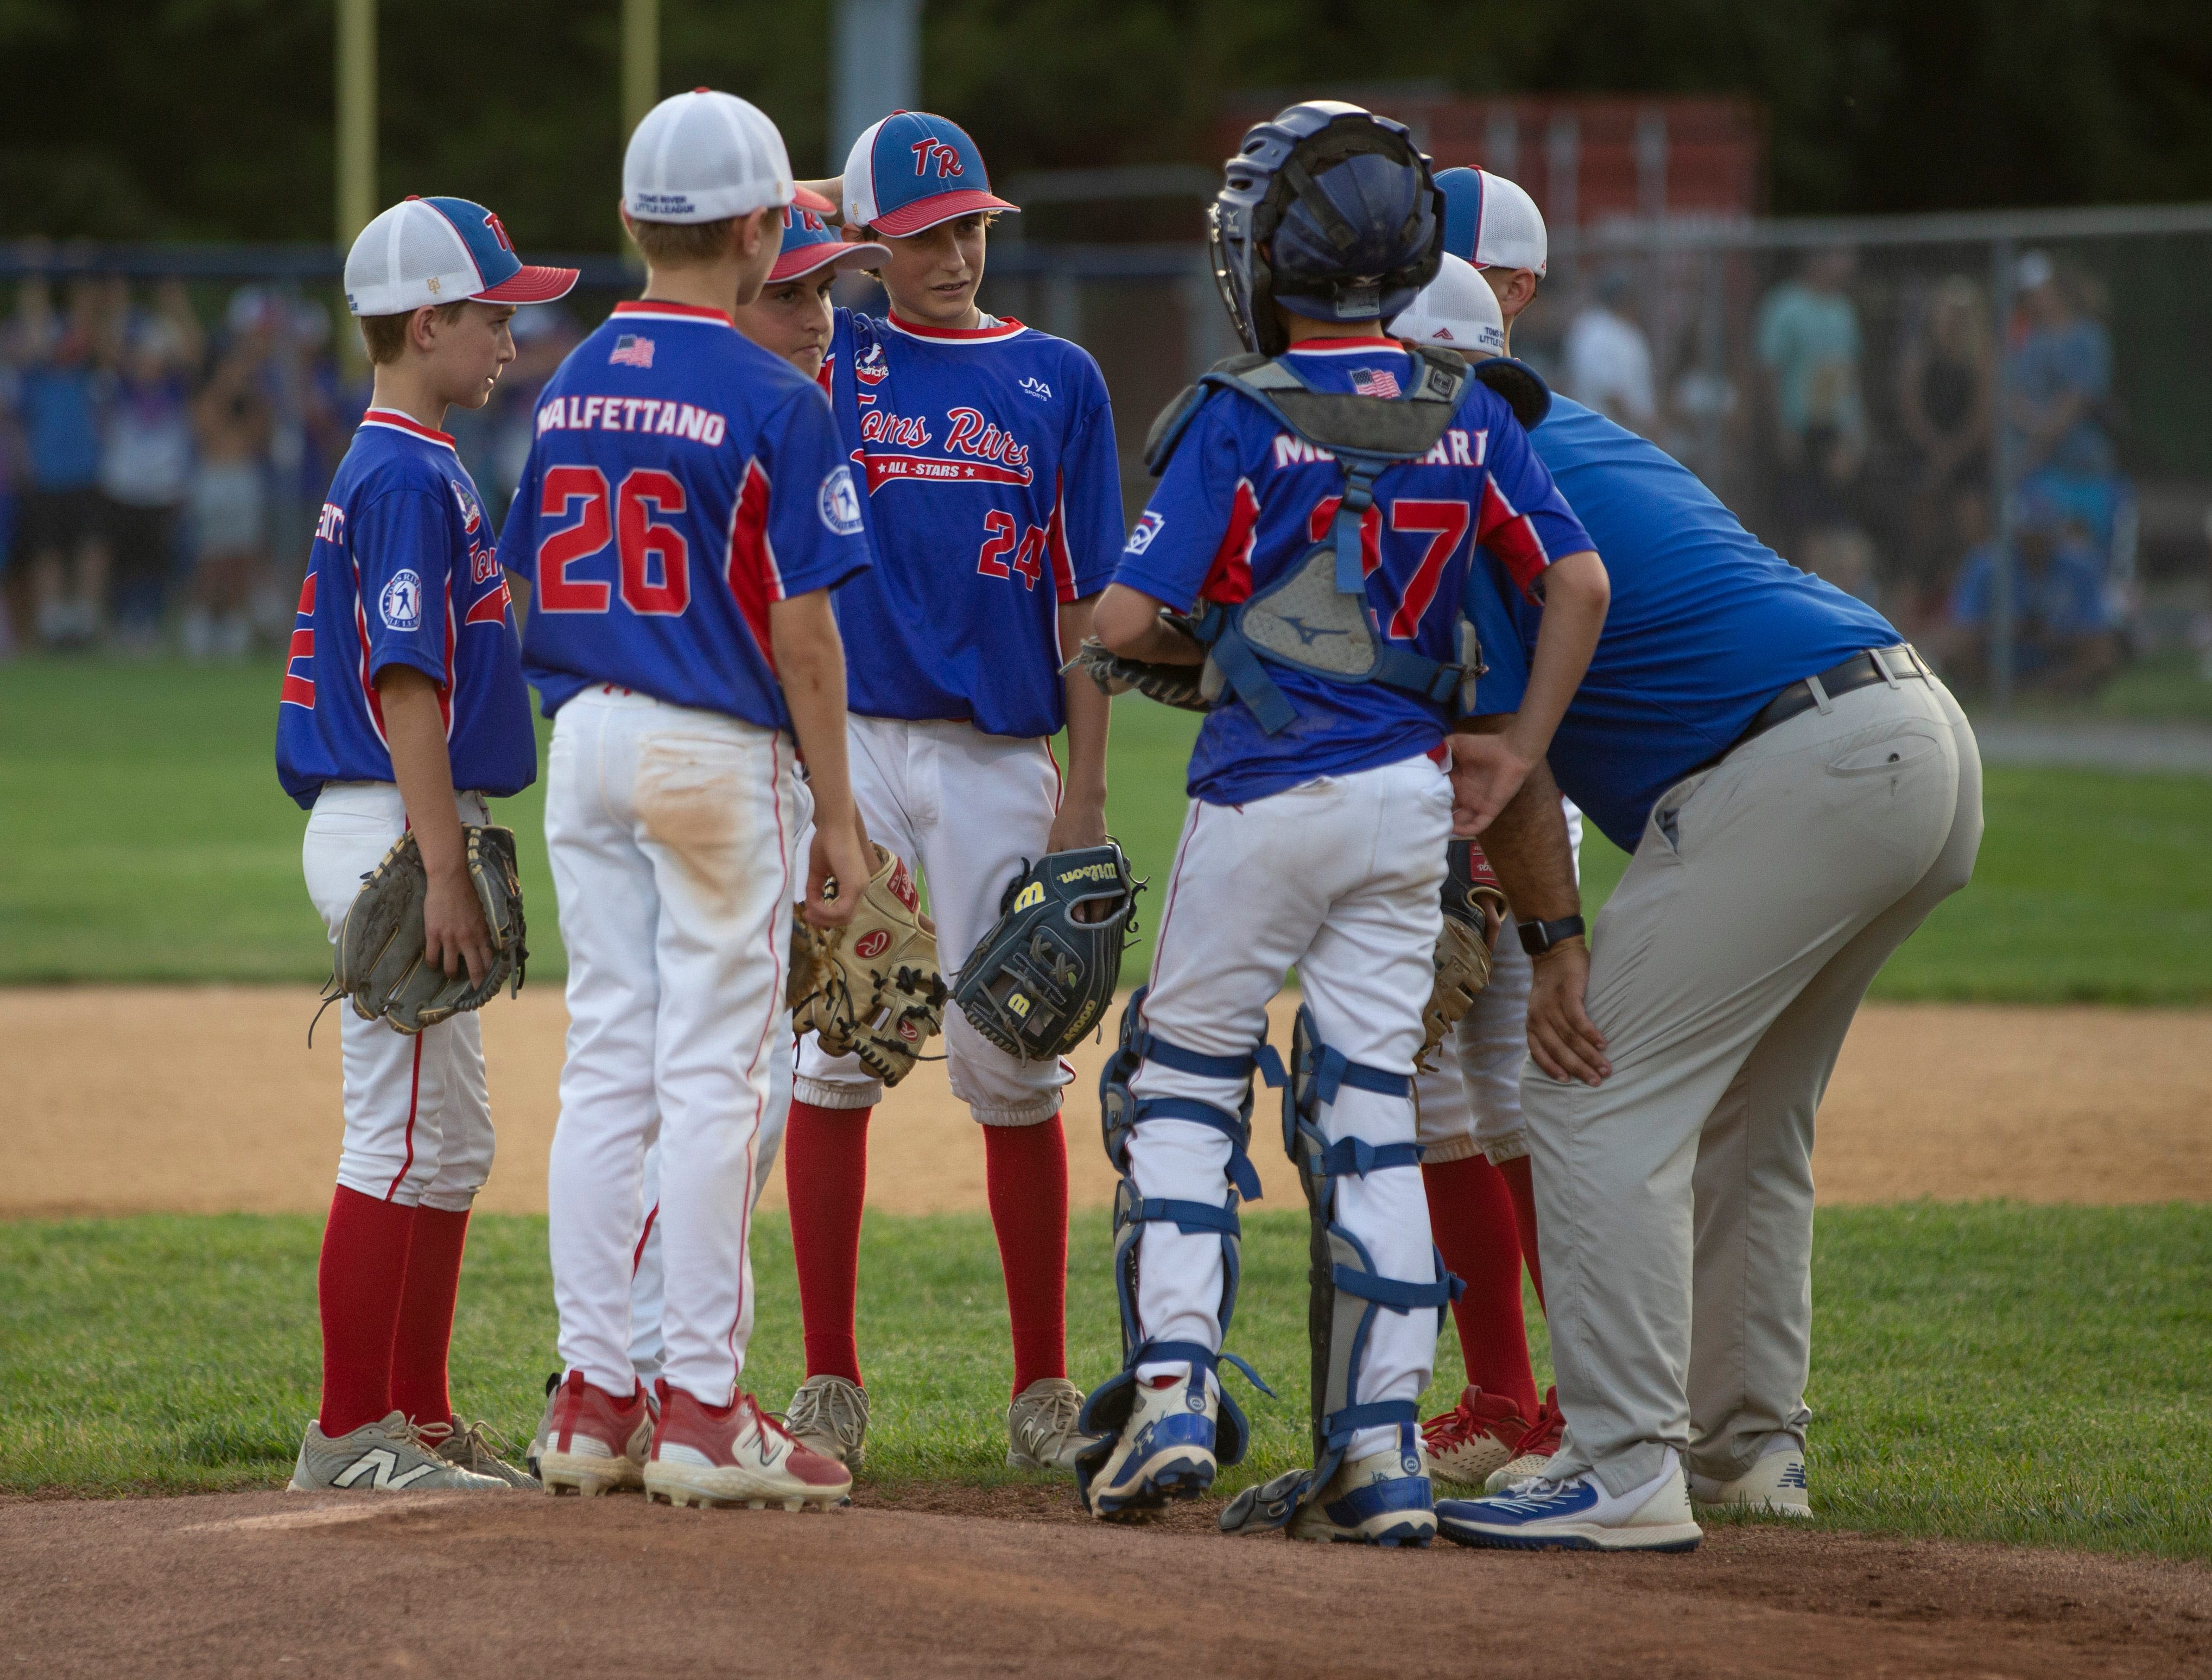 Another Toms River team in the Little League baseball state tournament? It might happen